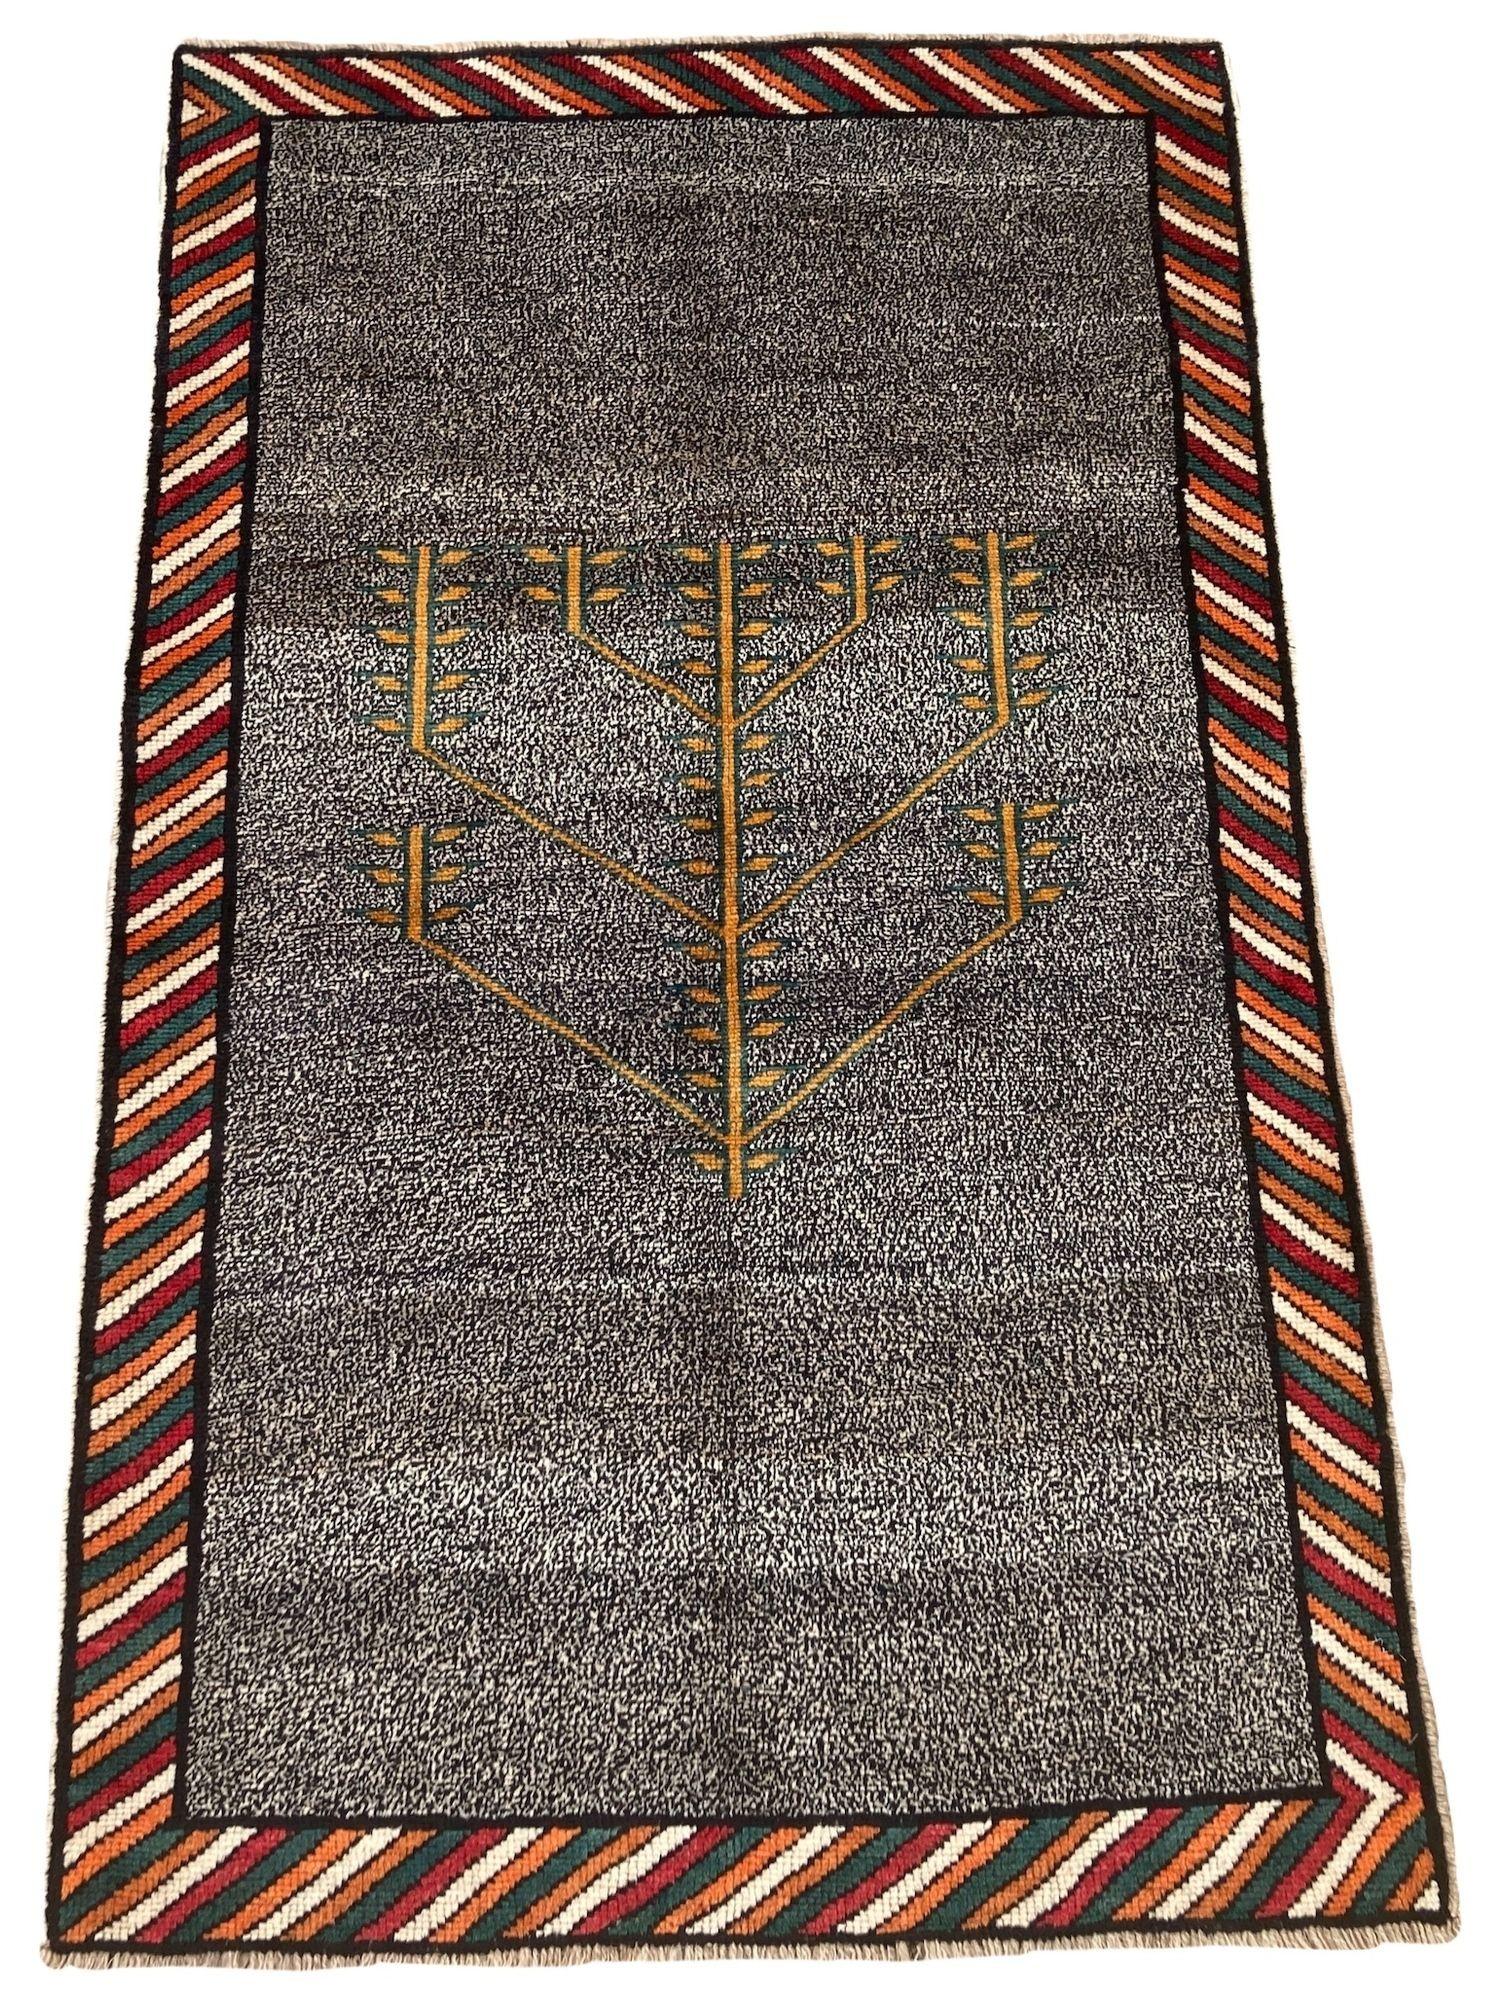 A beautiful vintage Gabbeh rug, handwoven by the nomadic Qashqai tribe circa 1960 with a stylised tree of life design on a black and white (commonly referred to as 'salt and pepper') field. Lovely wool quality and fabulous colours.
Size: 1.84m x